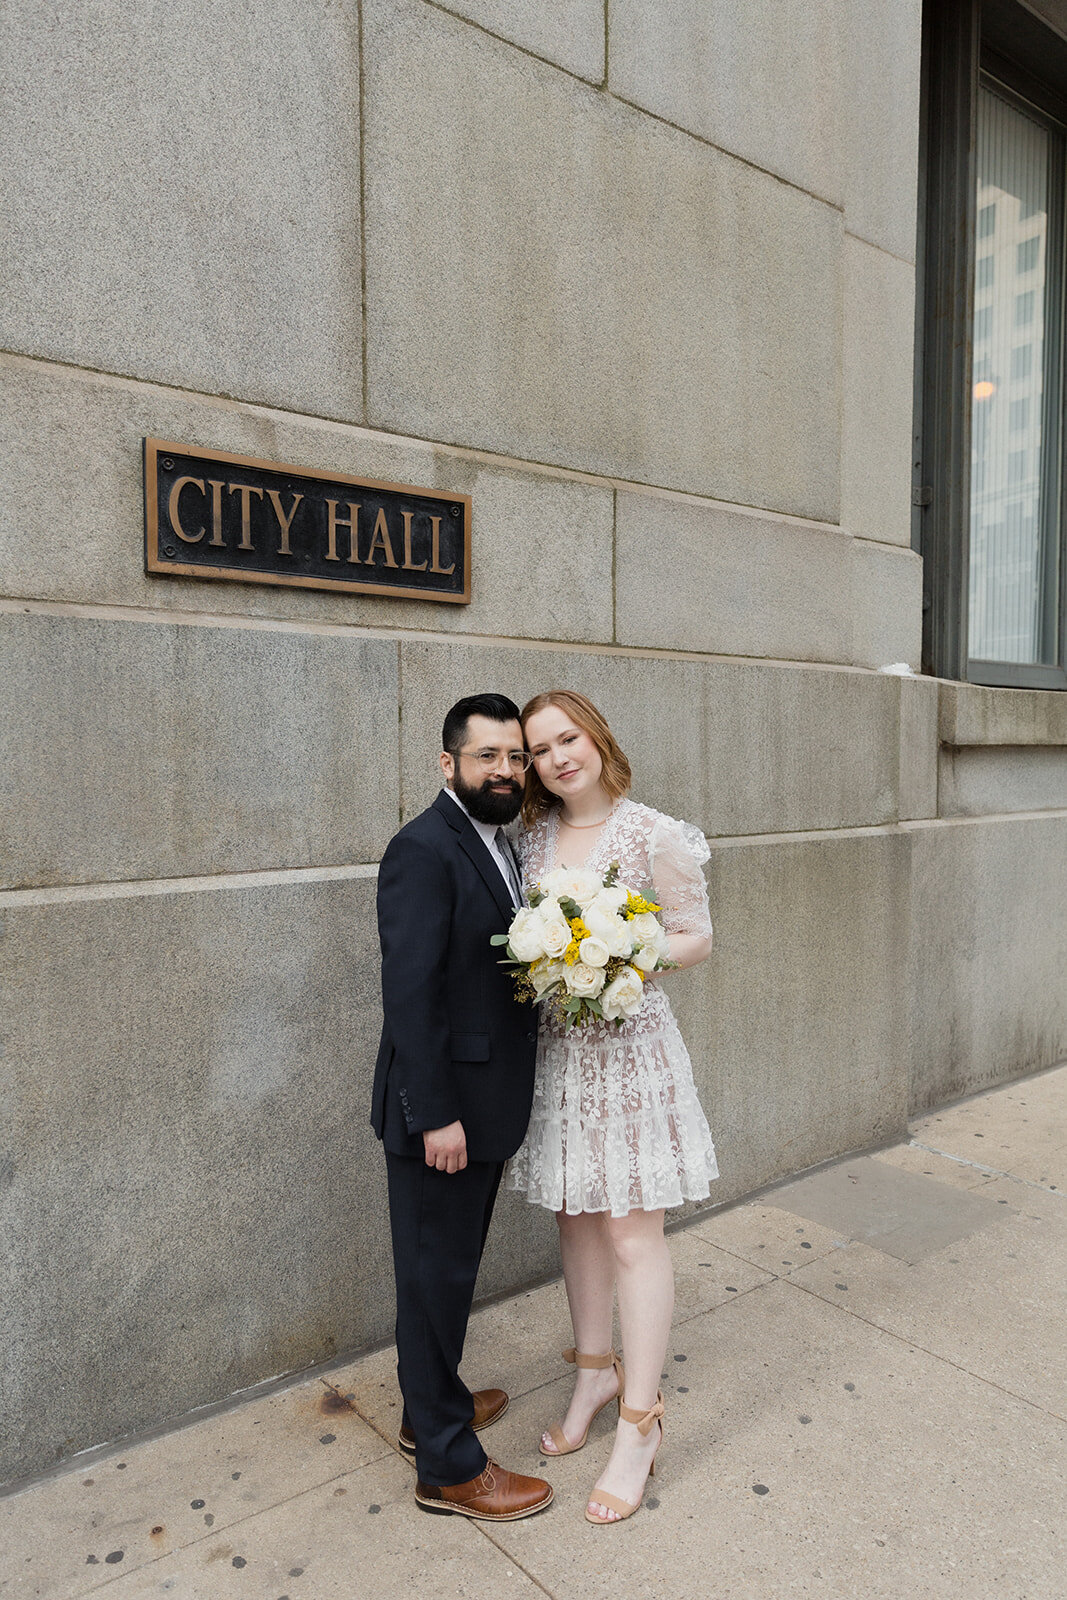 couple just married standing under Chicago city hall sign. Looking at camera and smiling, bride is holding a yellow bouquet.